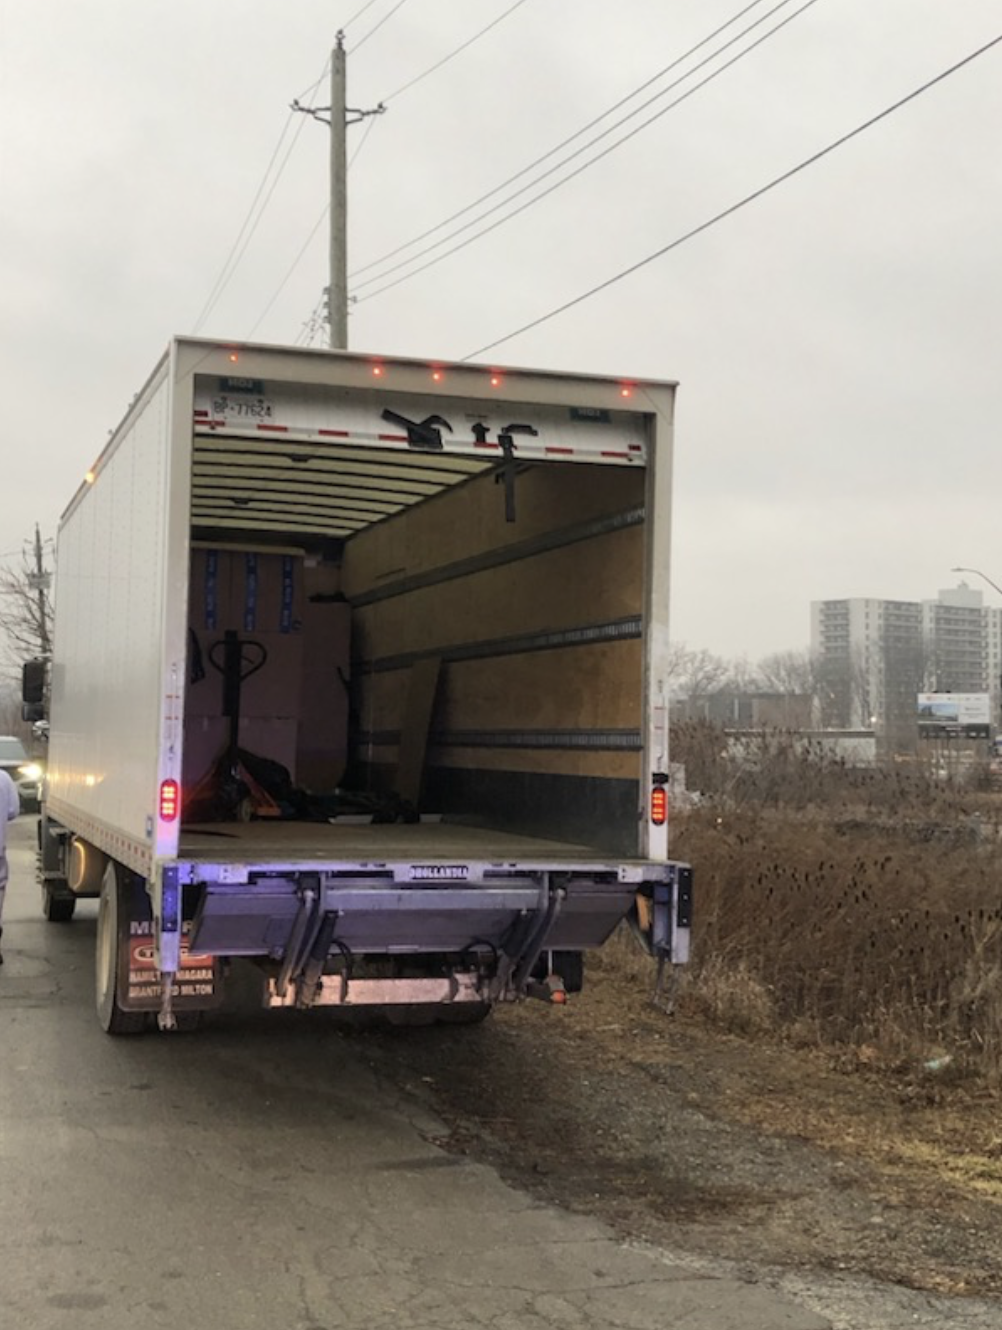 The stopped truck | OPP Highway Safety Division